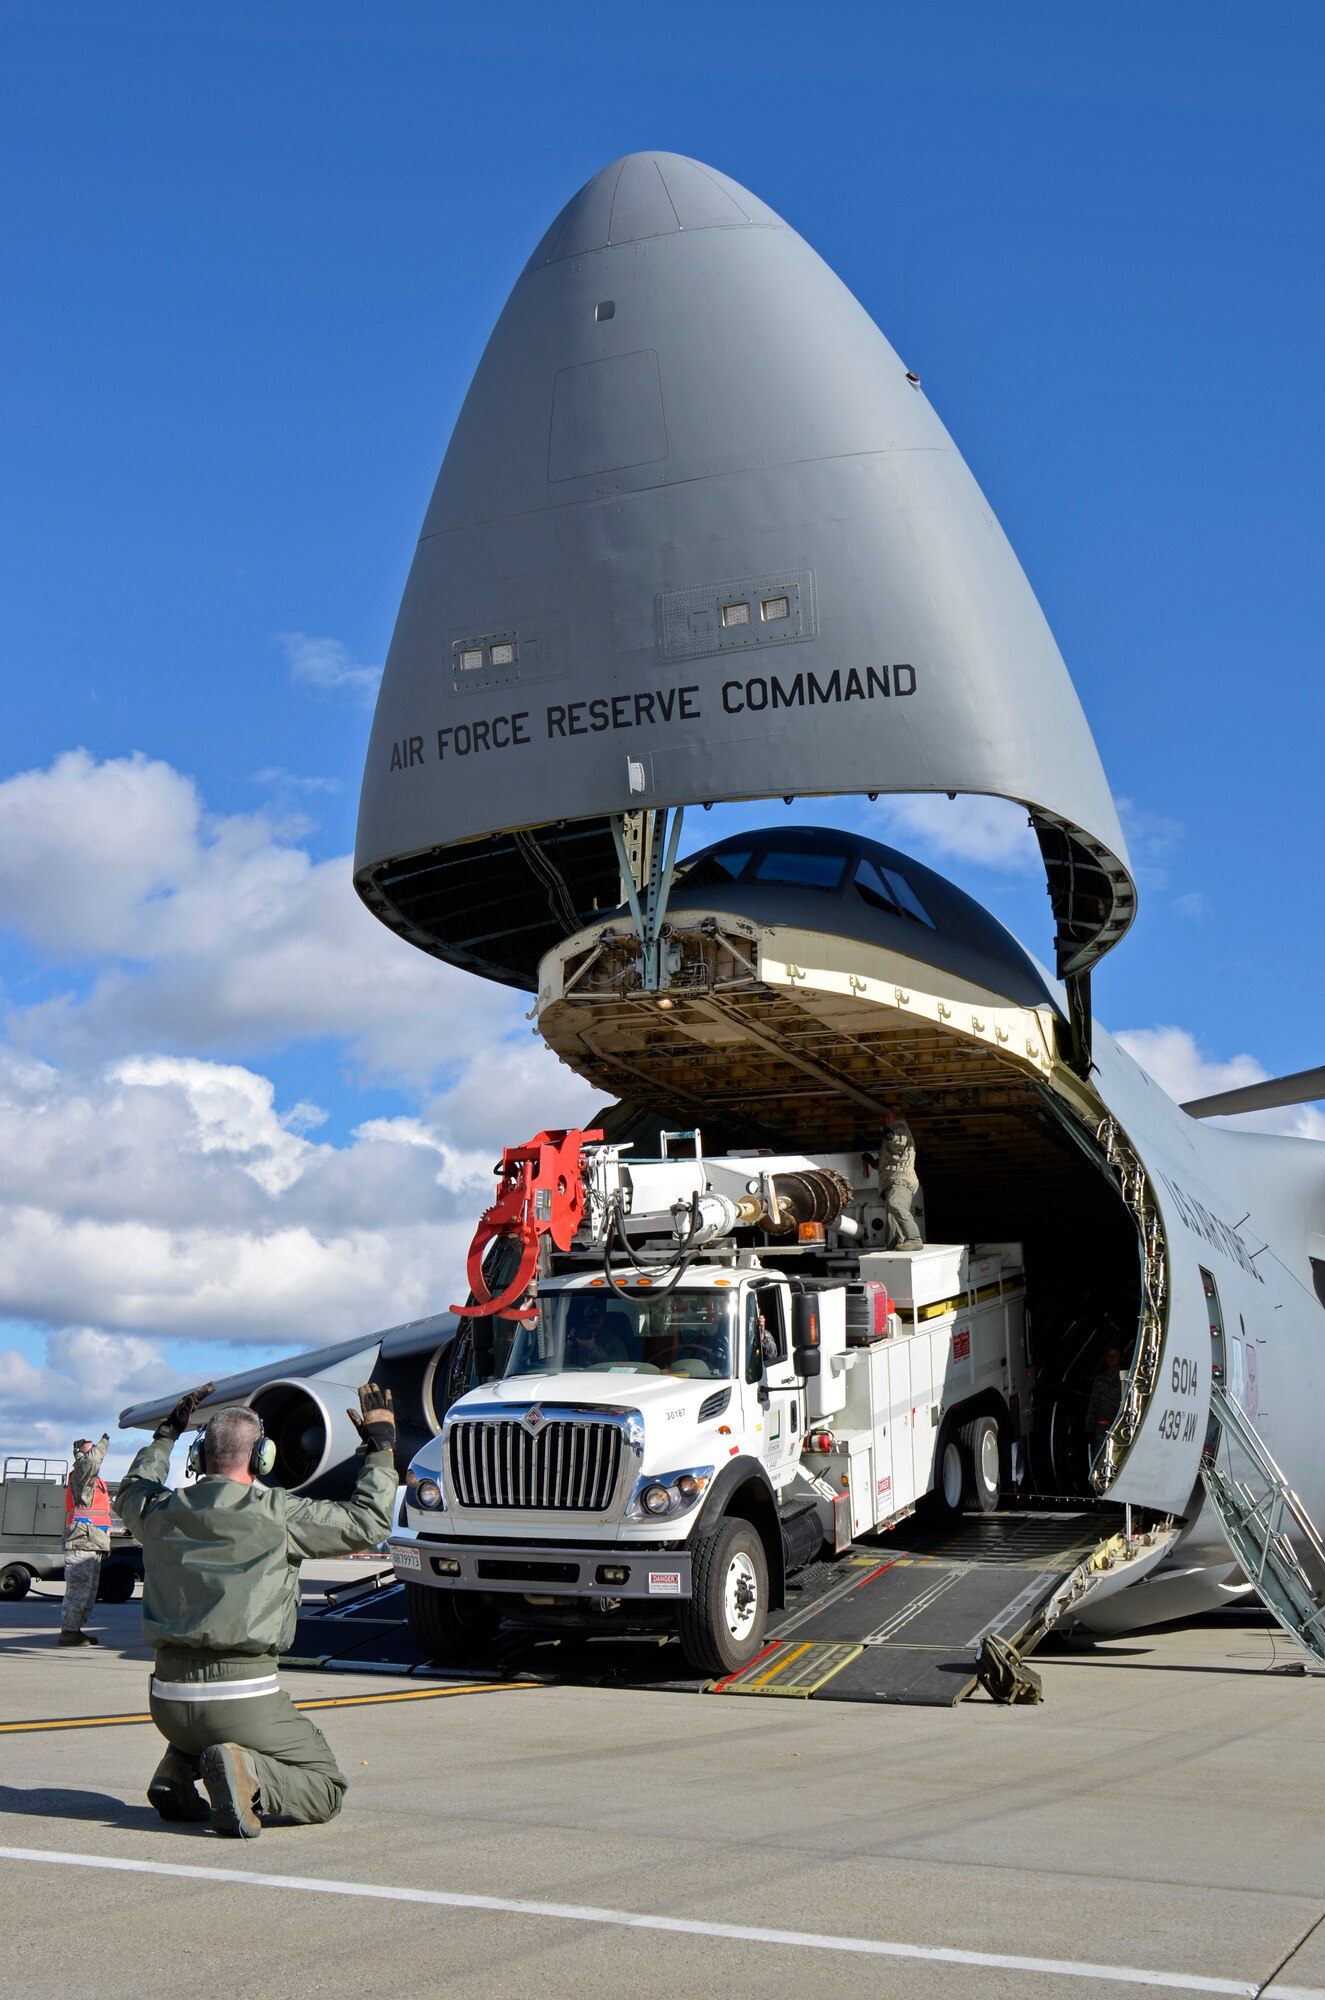 In response to President Obama's call for the government to support Hurricane Sandy relief efforts, a Westover C-5B flew to March Air Reserve Base, Calif., picked up 73 electrical workers and two utility trucks, and dropped them off at Stewart Air National Guard Base, N.Y. hours later. The workers and equipment will augment relief efforts in New York and New Jersey. (U.S. Air Force photo/SrA. Kelly Galloway)